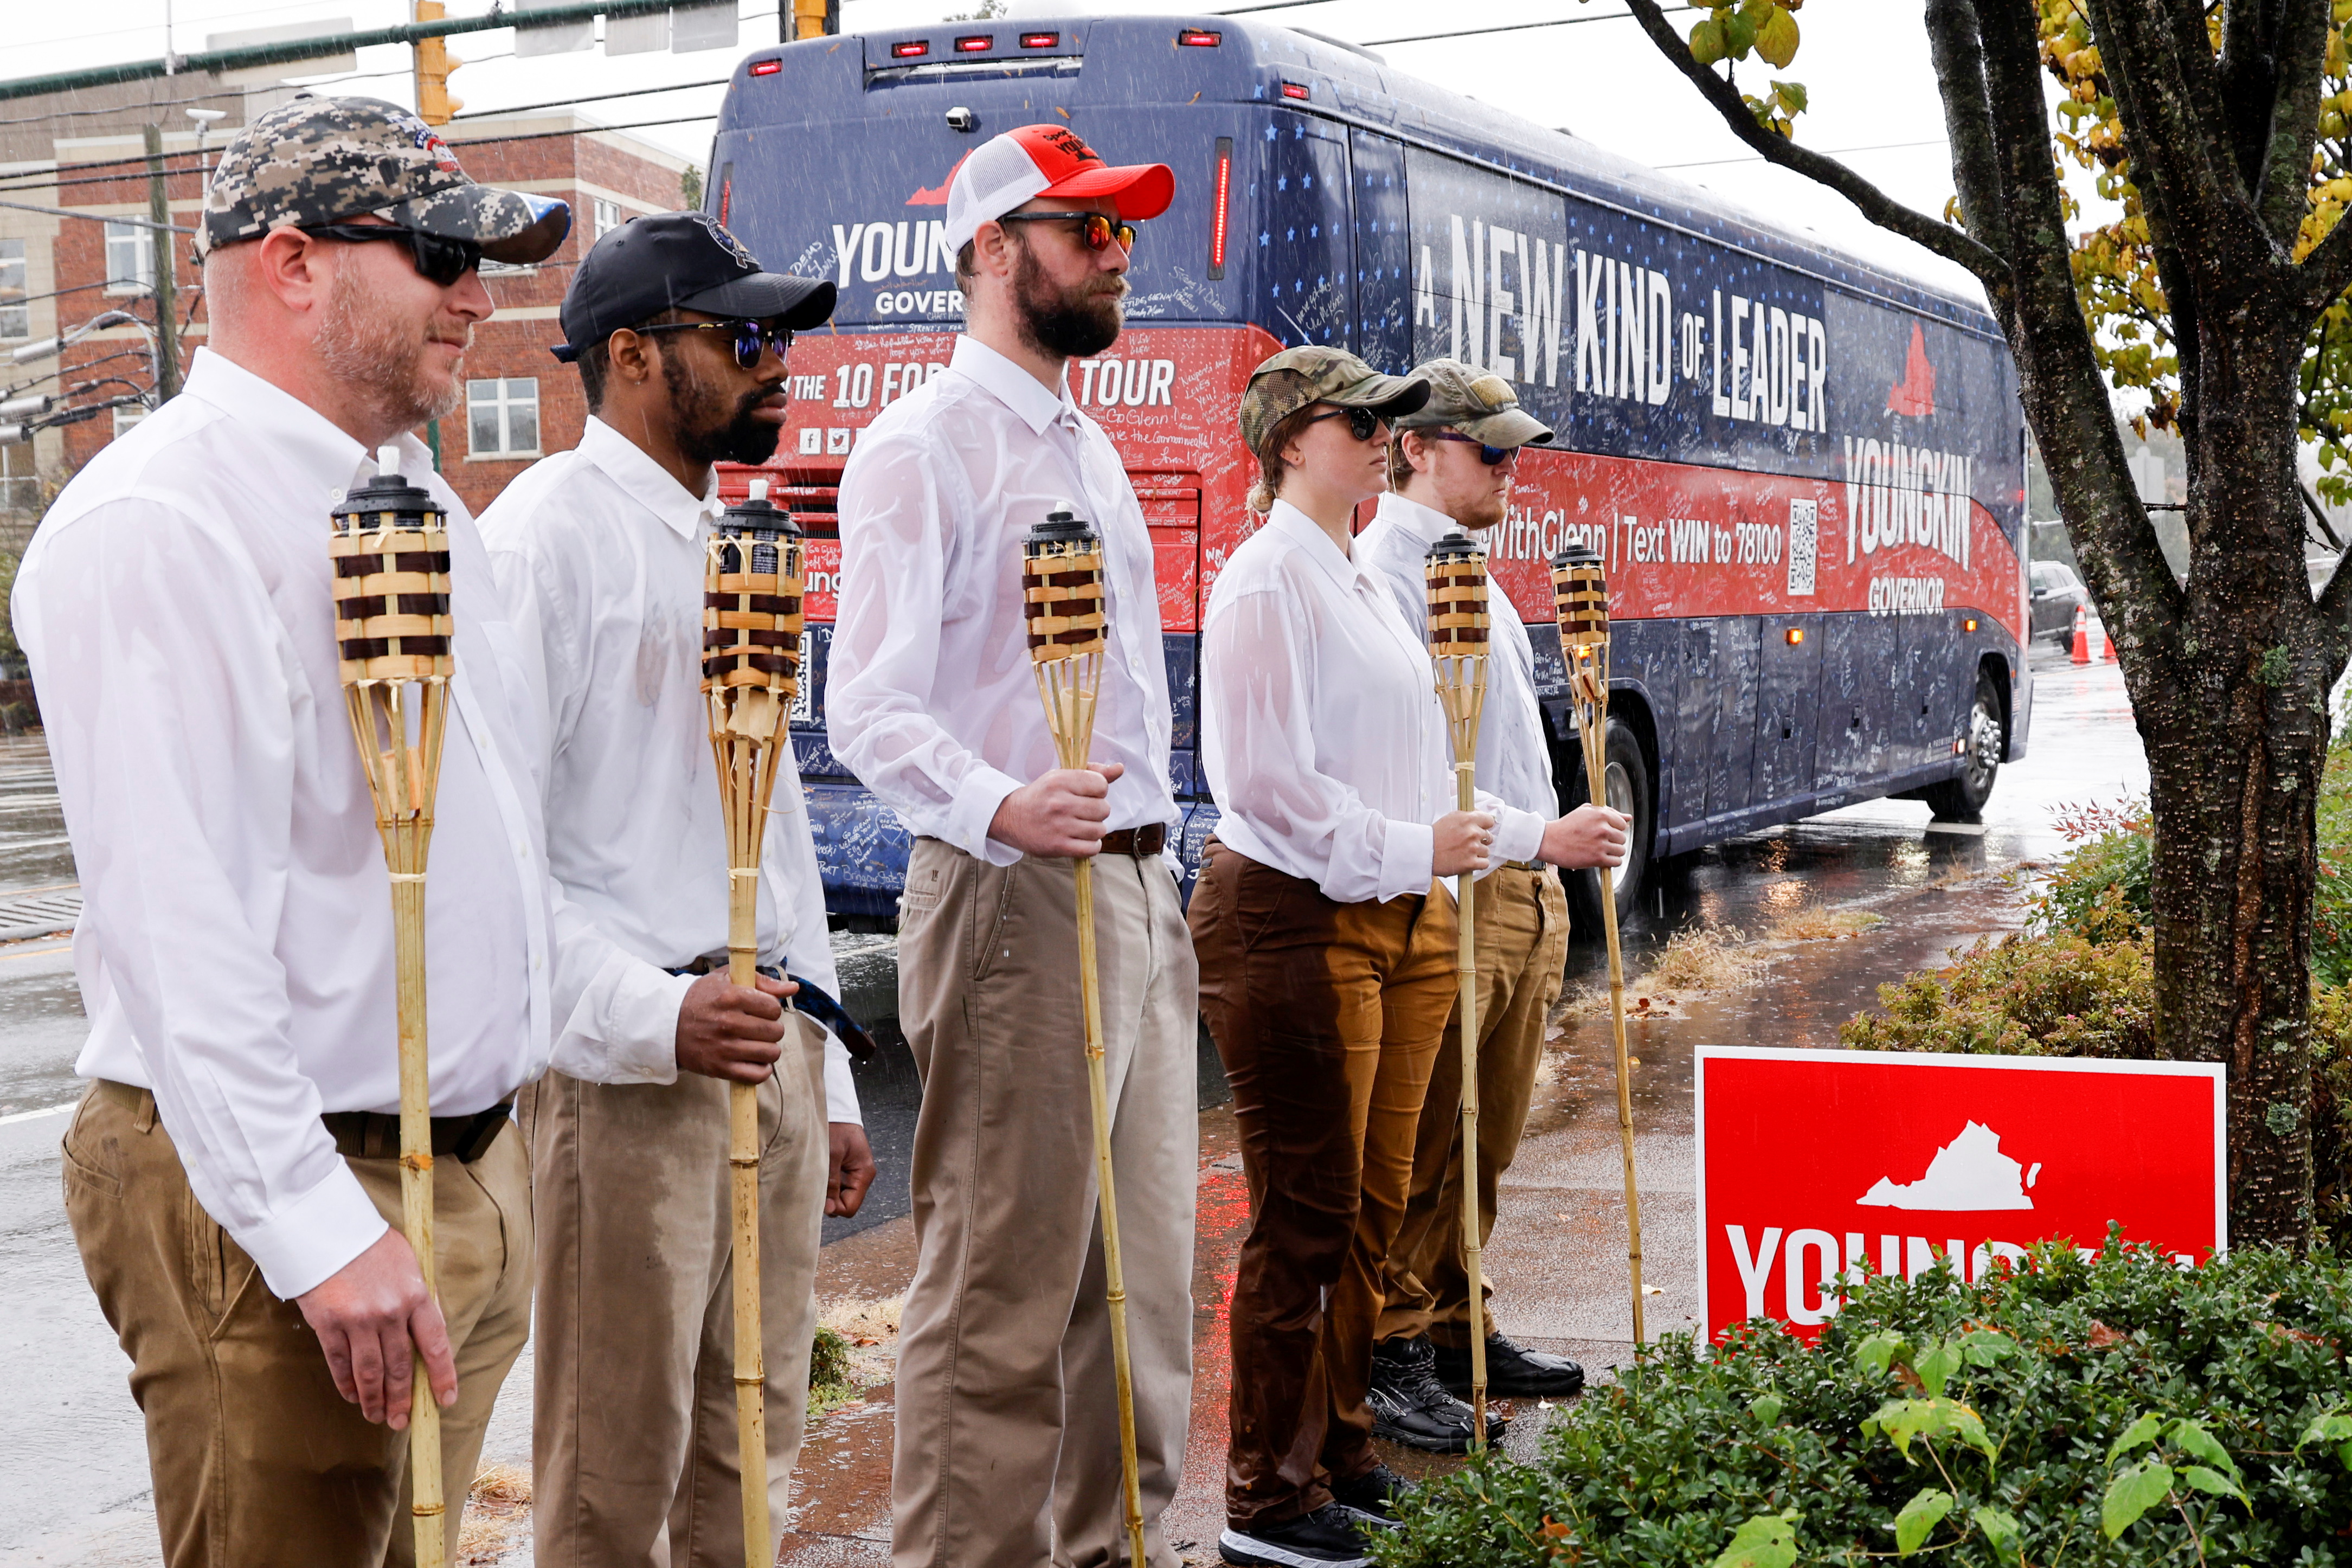 Republican candidate for governor of Virginia Youngkin holds a campaign event in Charlottesville, Virginia